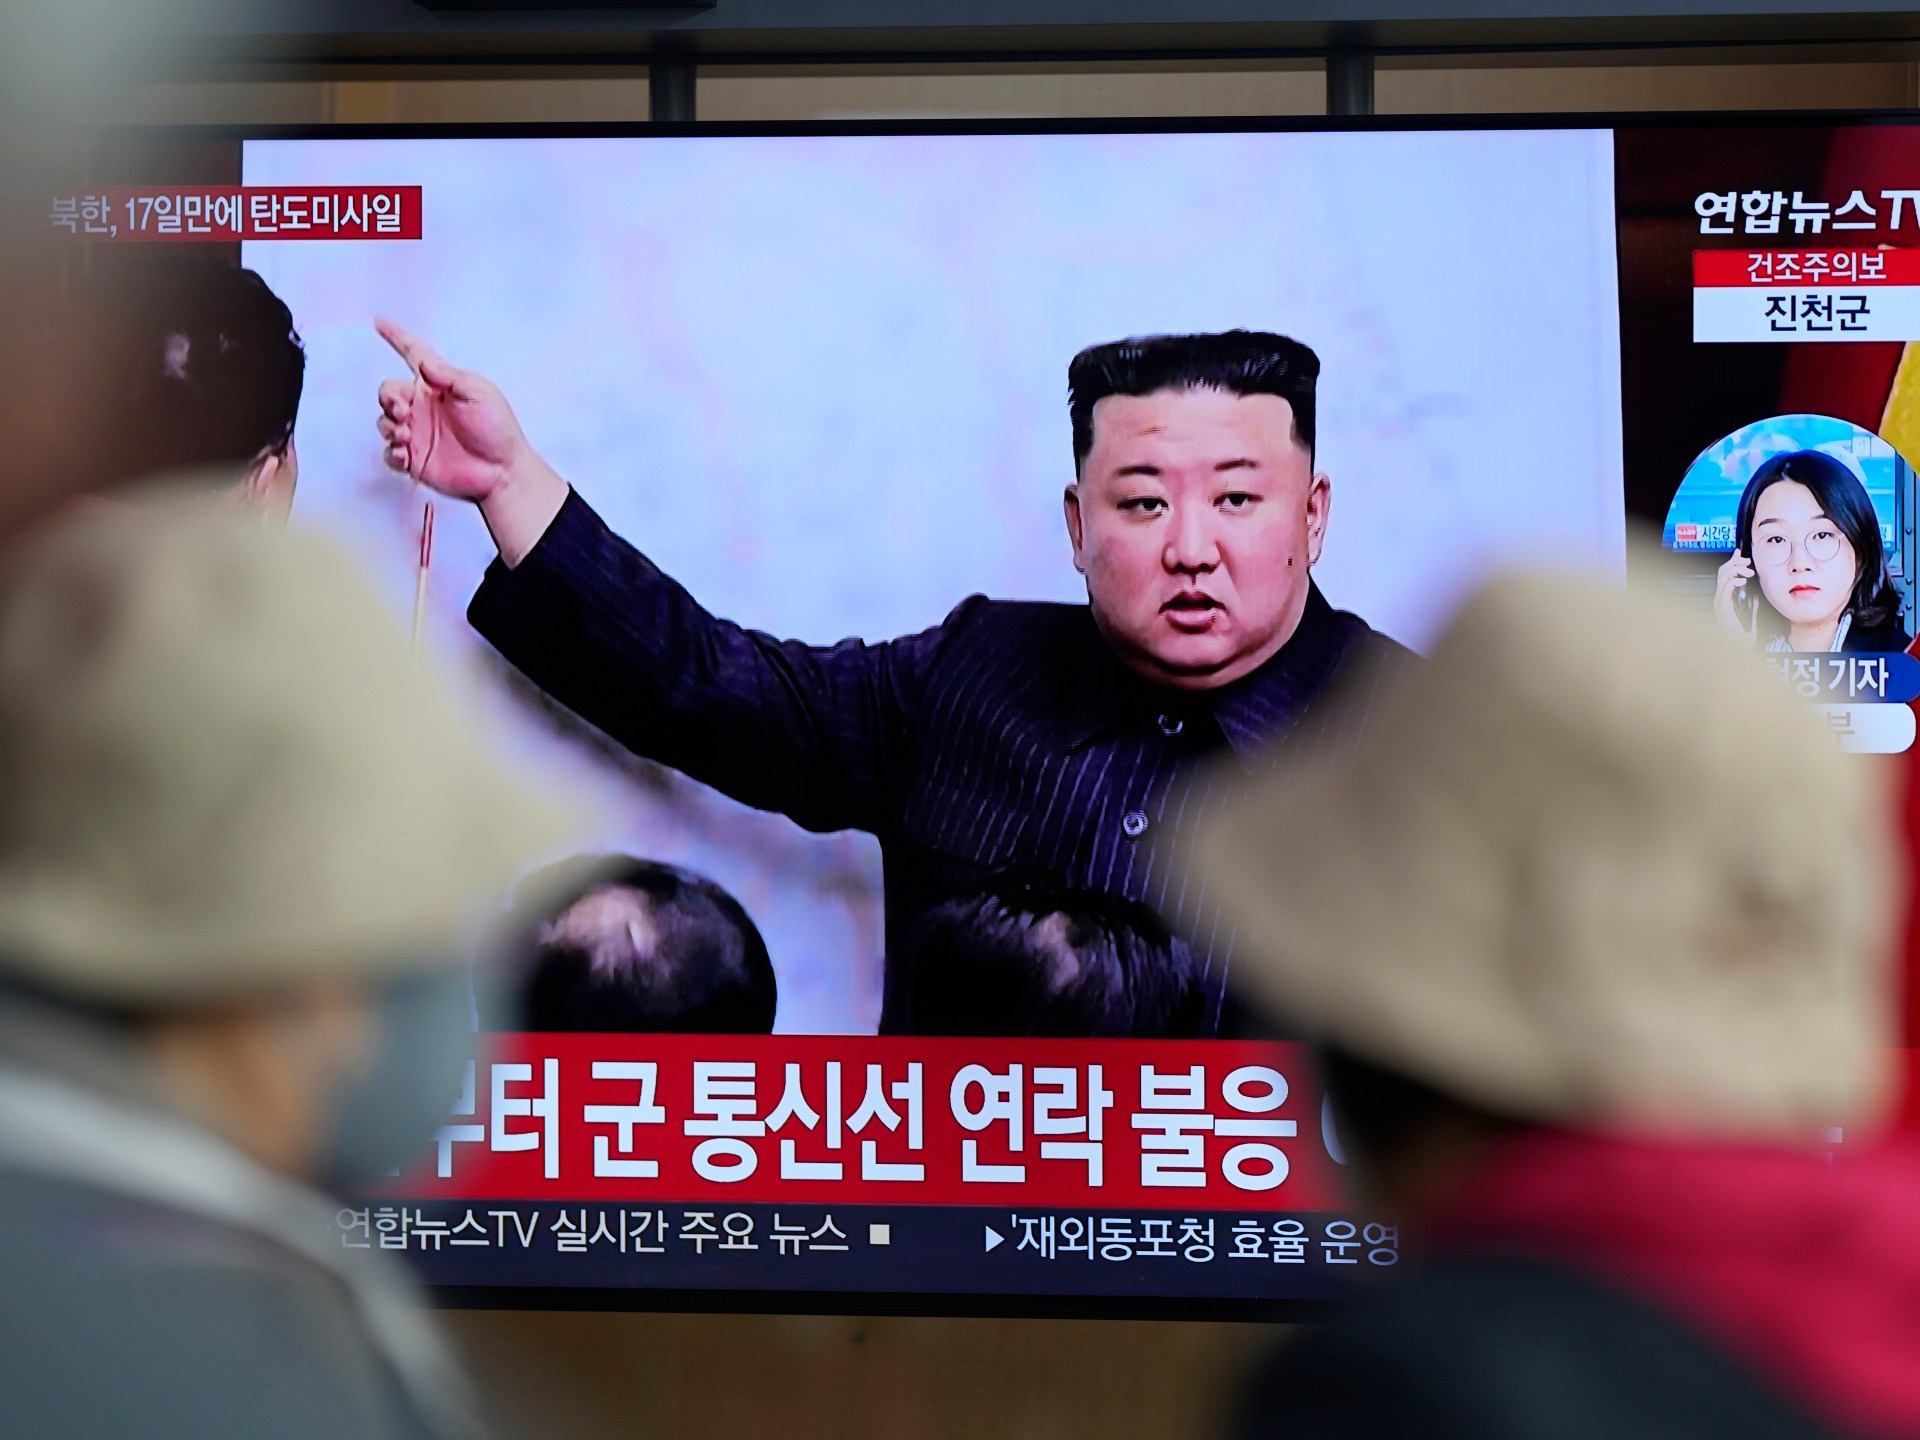 North Korea fires possible ‘new type’ ballistic missile